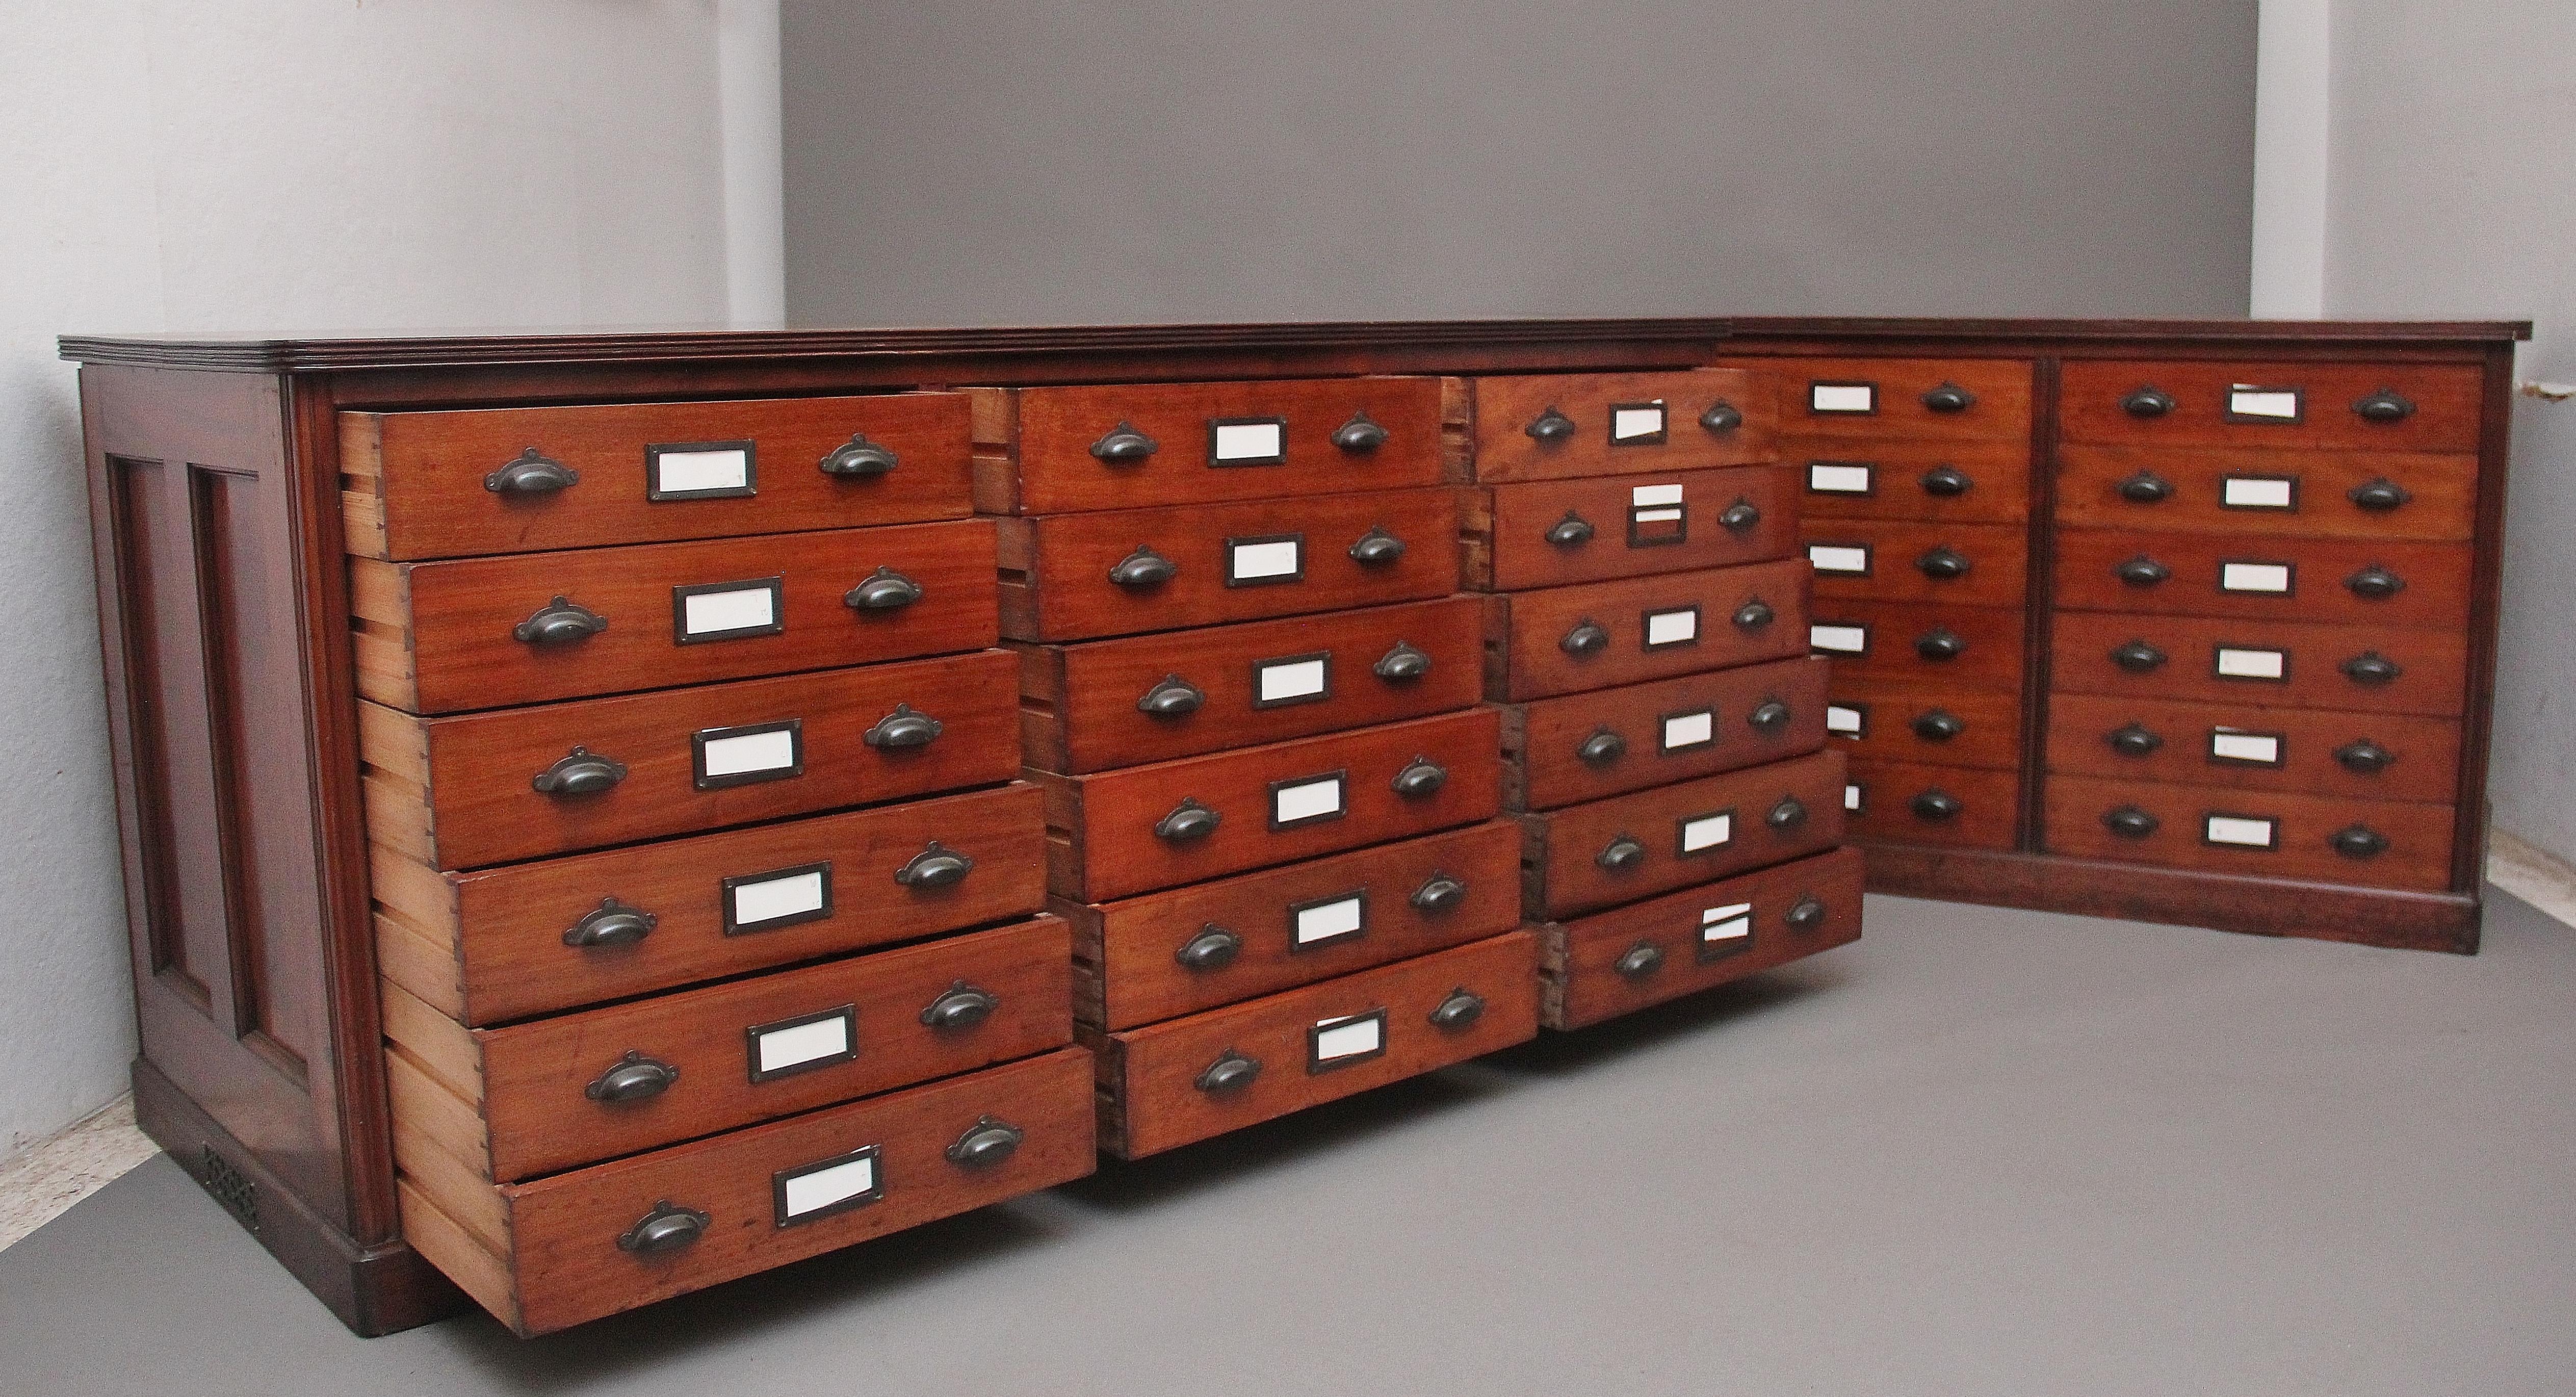 A pair of superb quality early 20th Century mahogany multi drawer chest’s that were originally made for the British museum, each chest having a combination of eighteen drawers with the original brass plate handles and name plates, lovely figured